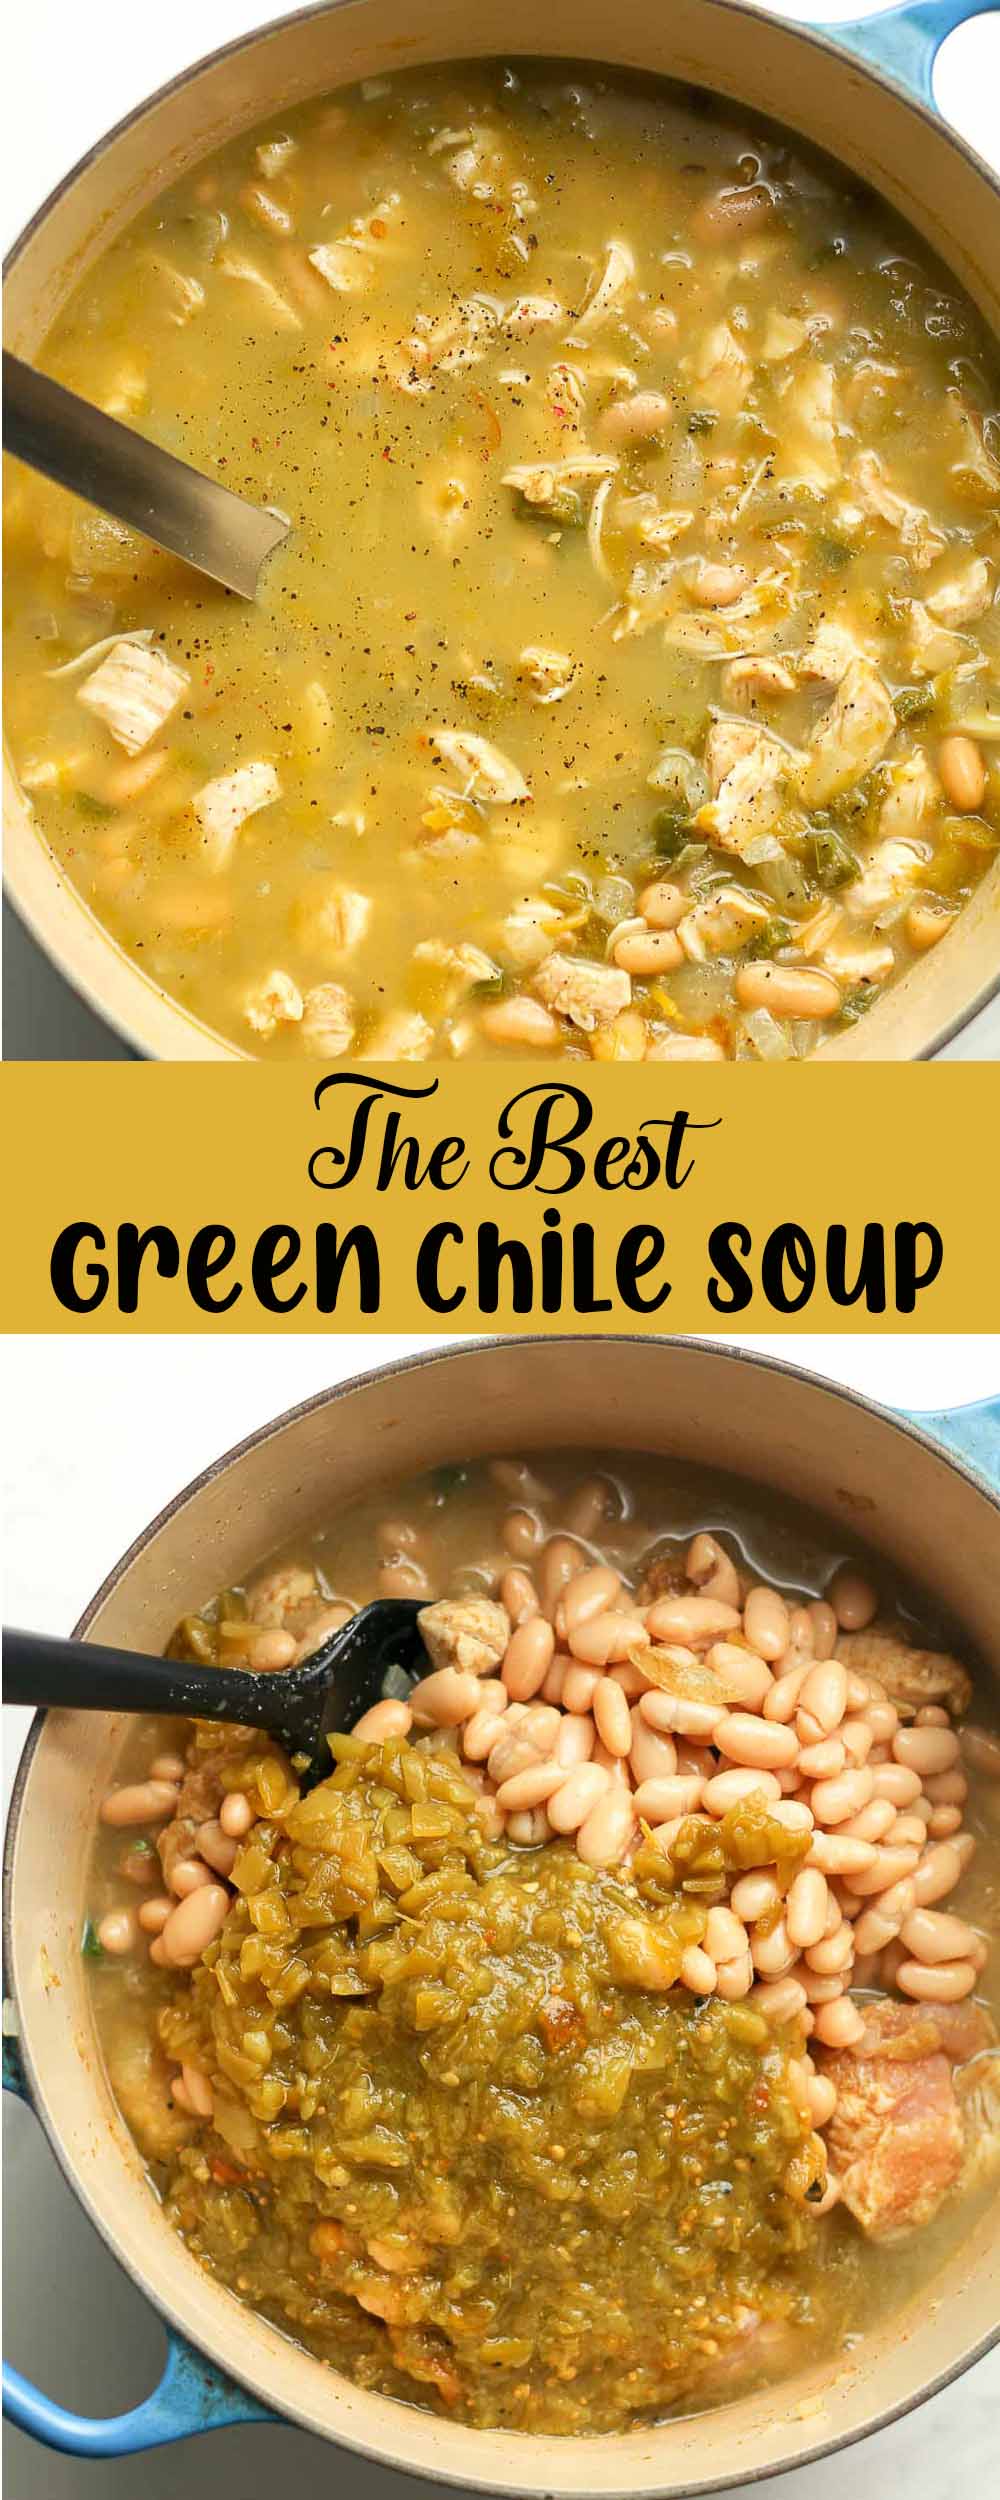 Two photos of the best green Chile soup.